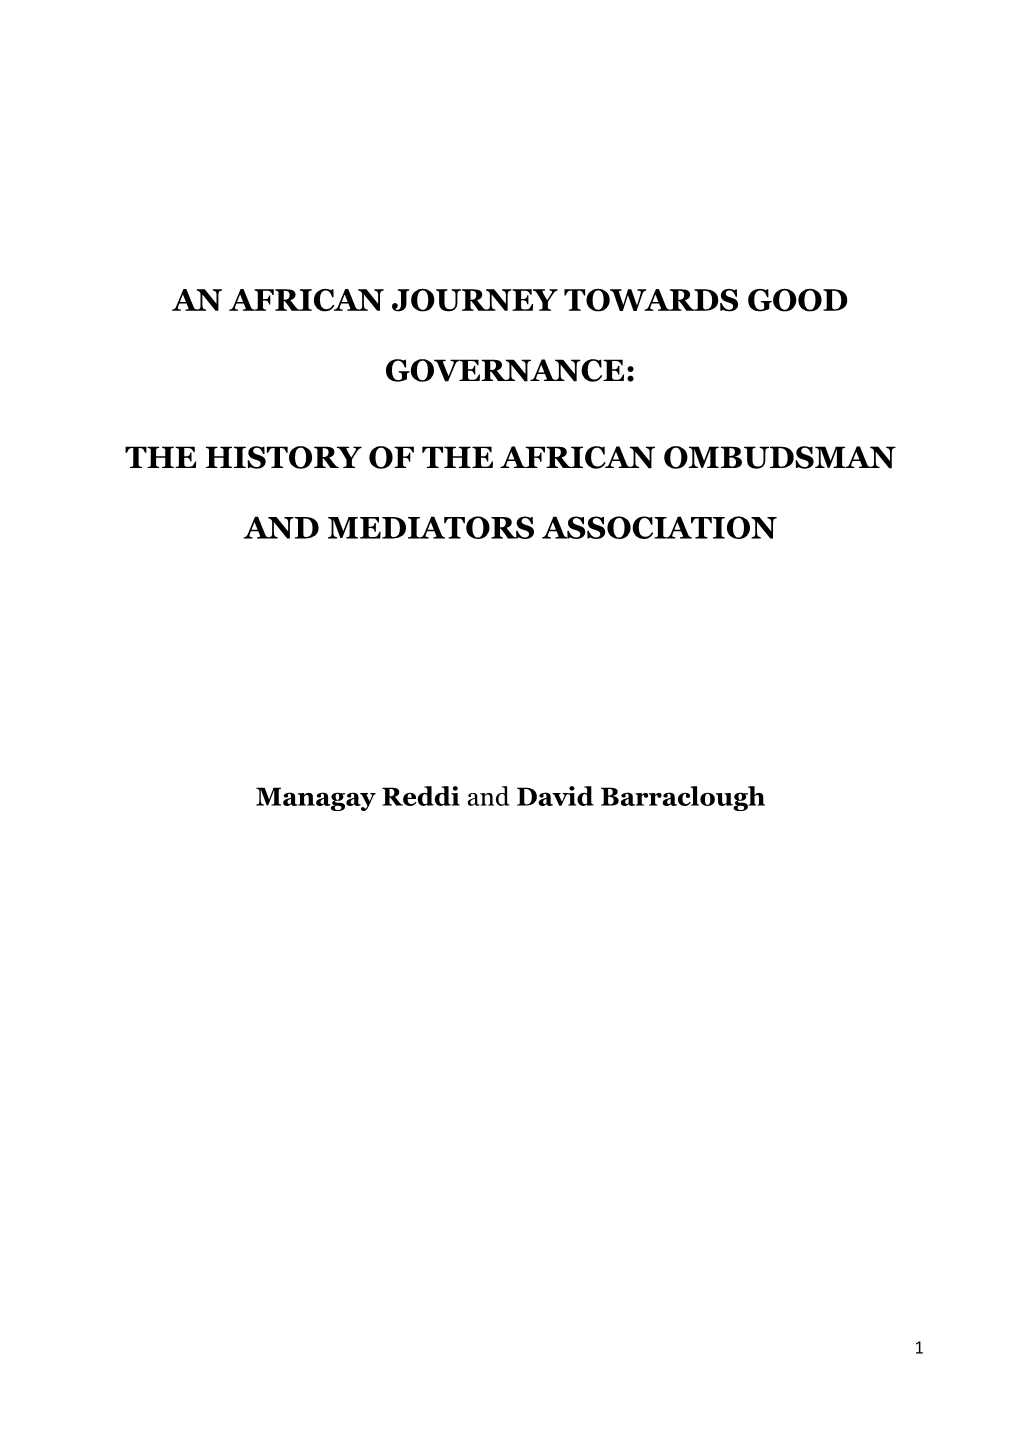 The History of the African Ombudsman and Mediators